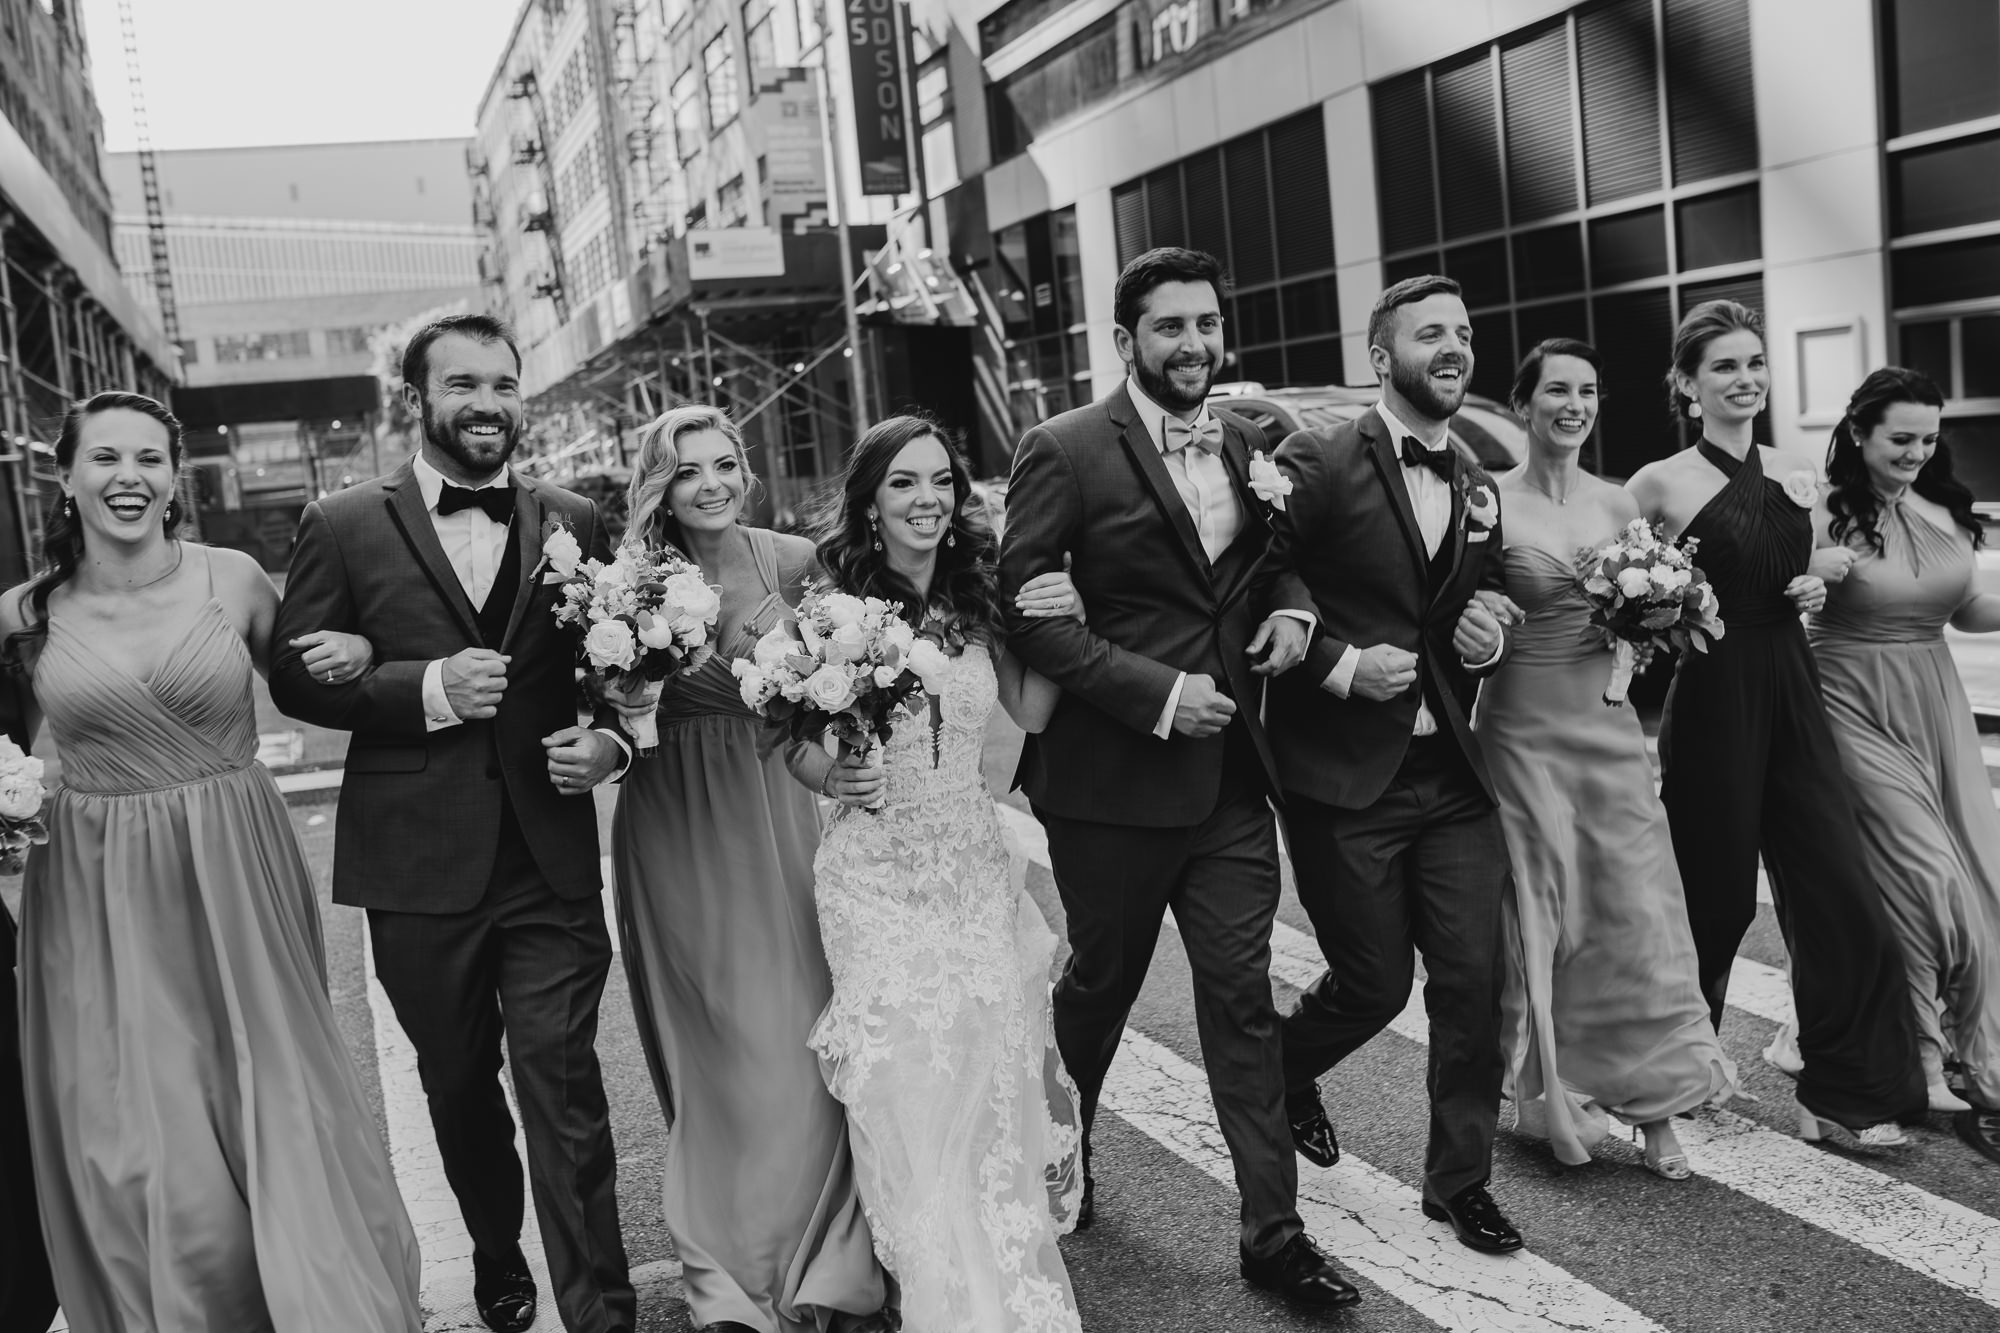 a portrait of a bride and groom with their wedding party at city winery in new york city, new york